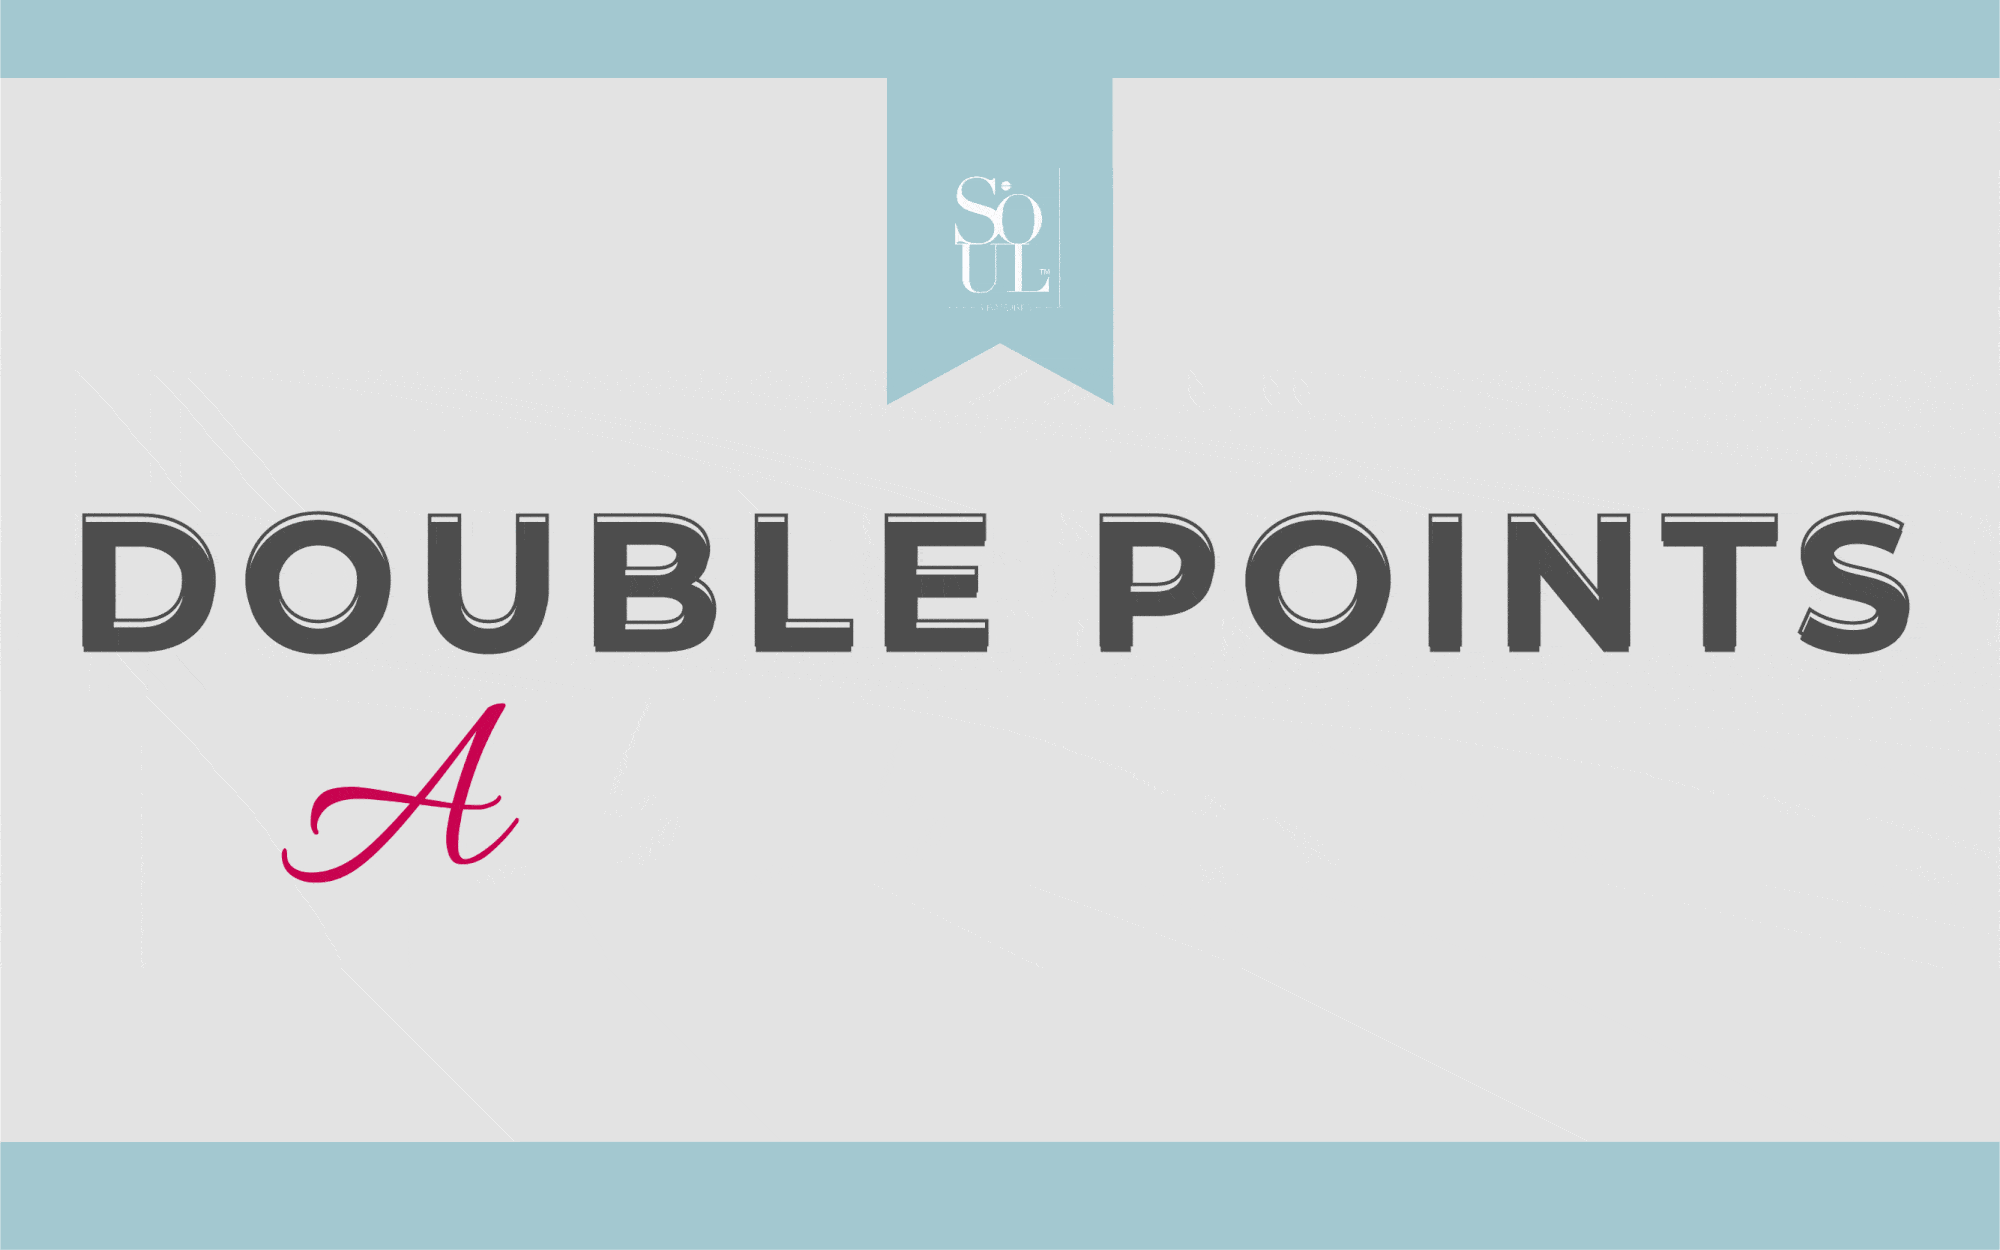  Rl DOUBLE POINTS A 